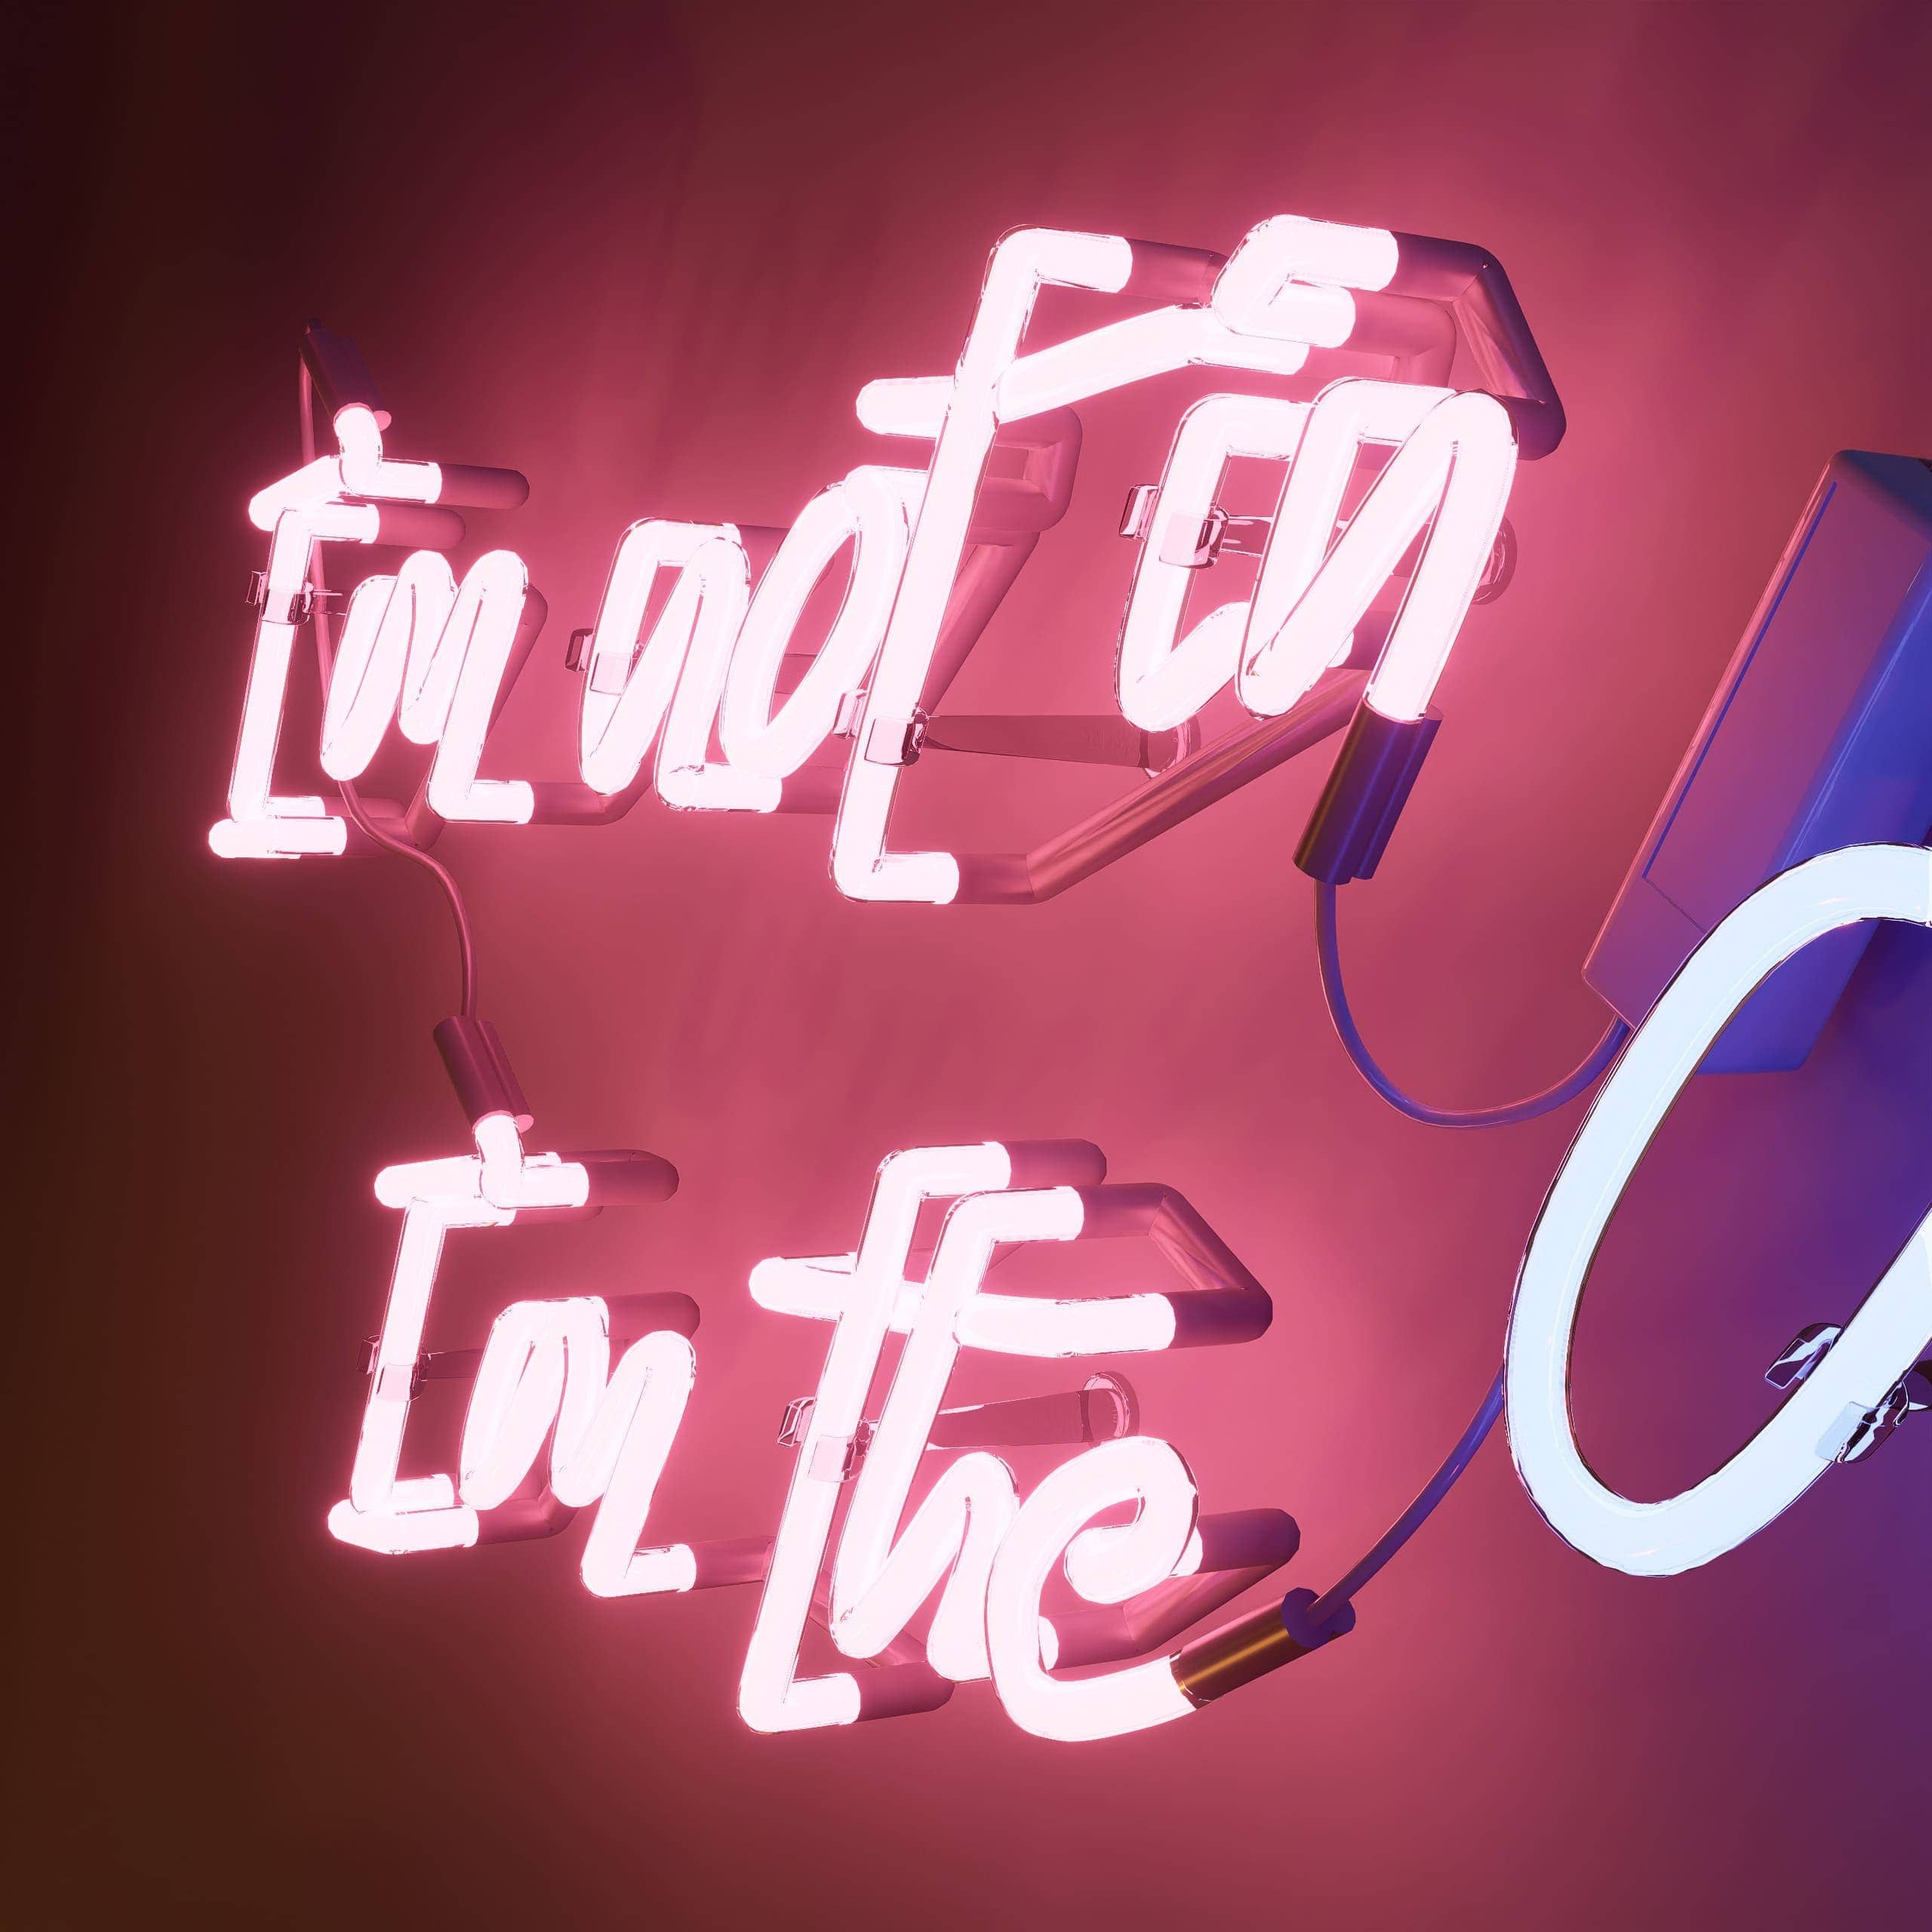 vintage-neon-signs-inspire-with-a-fearless-statement